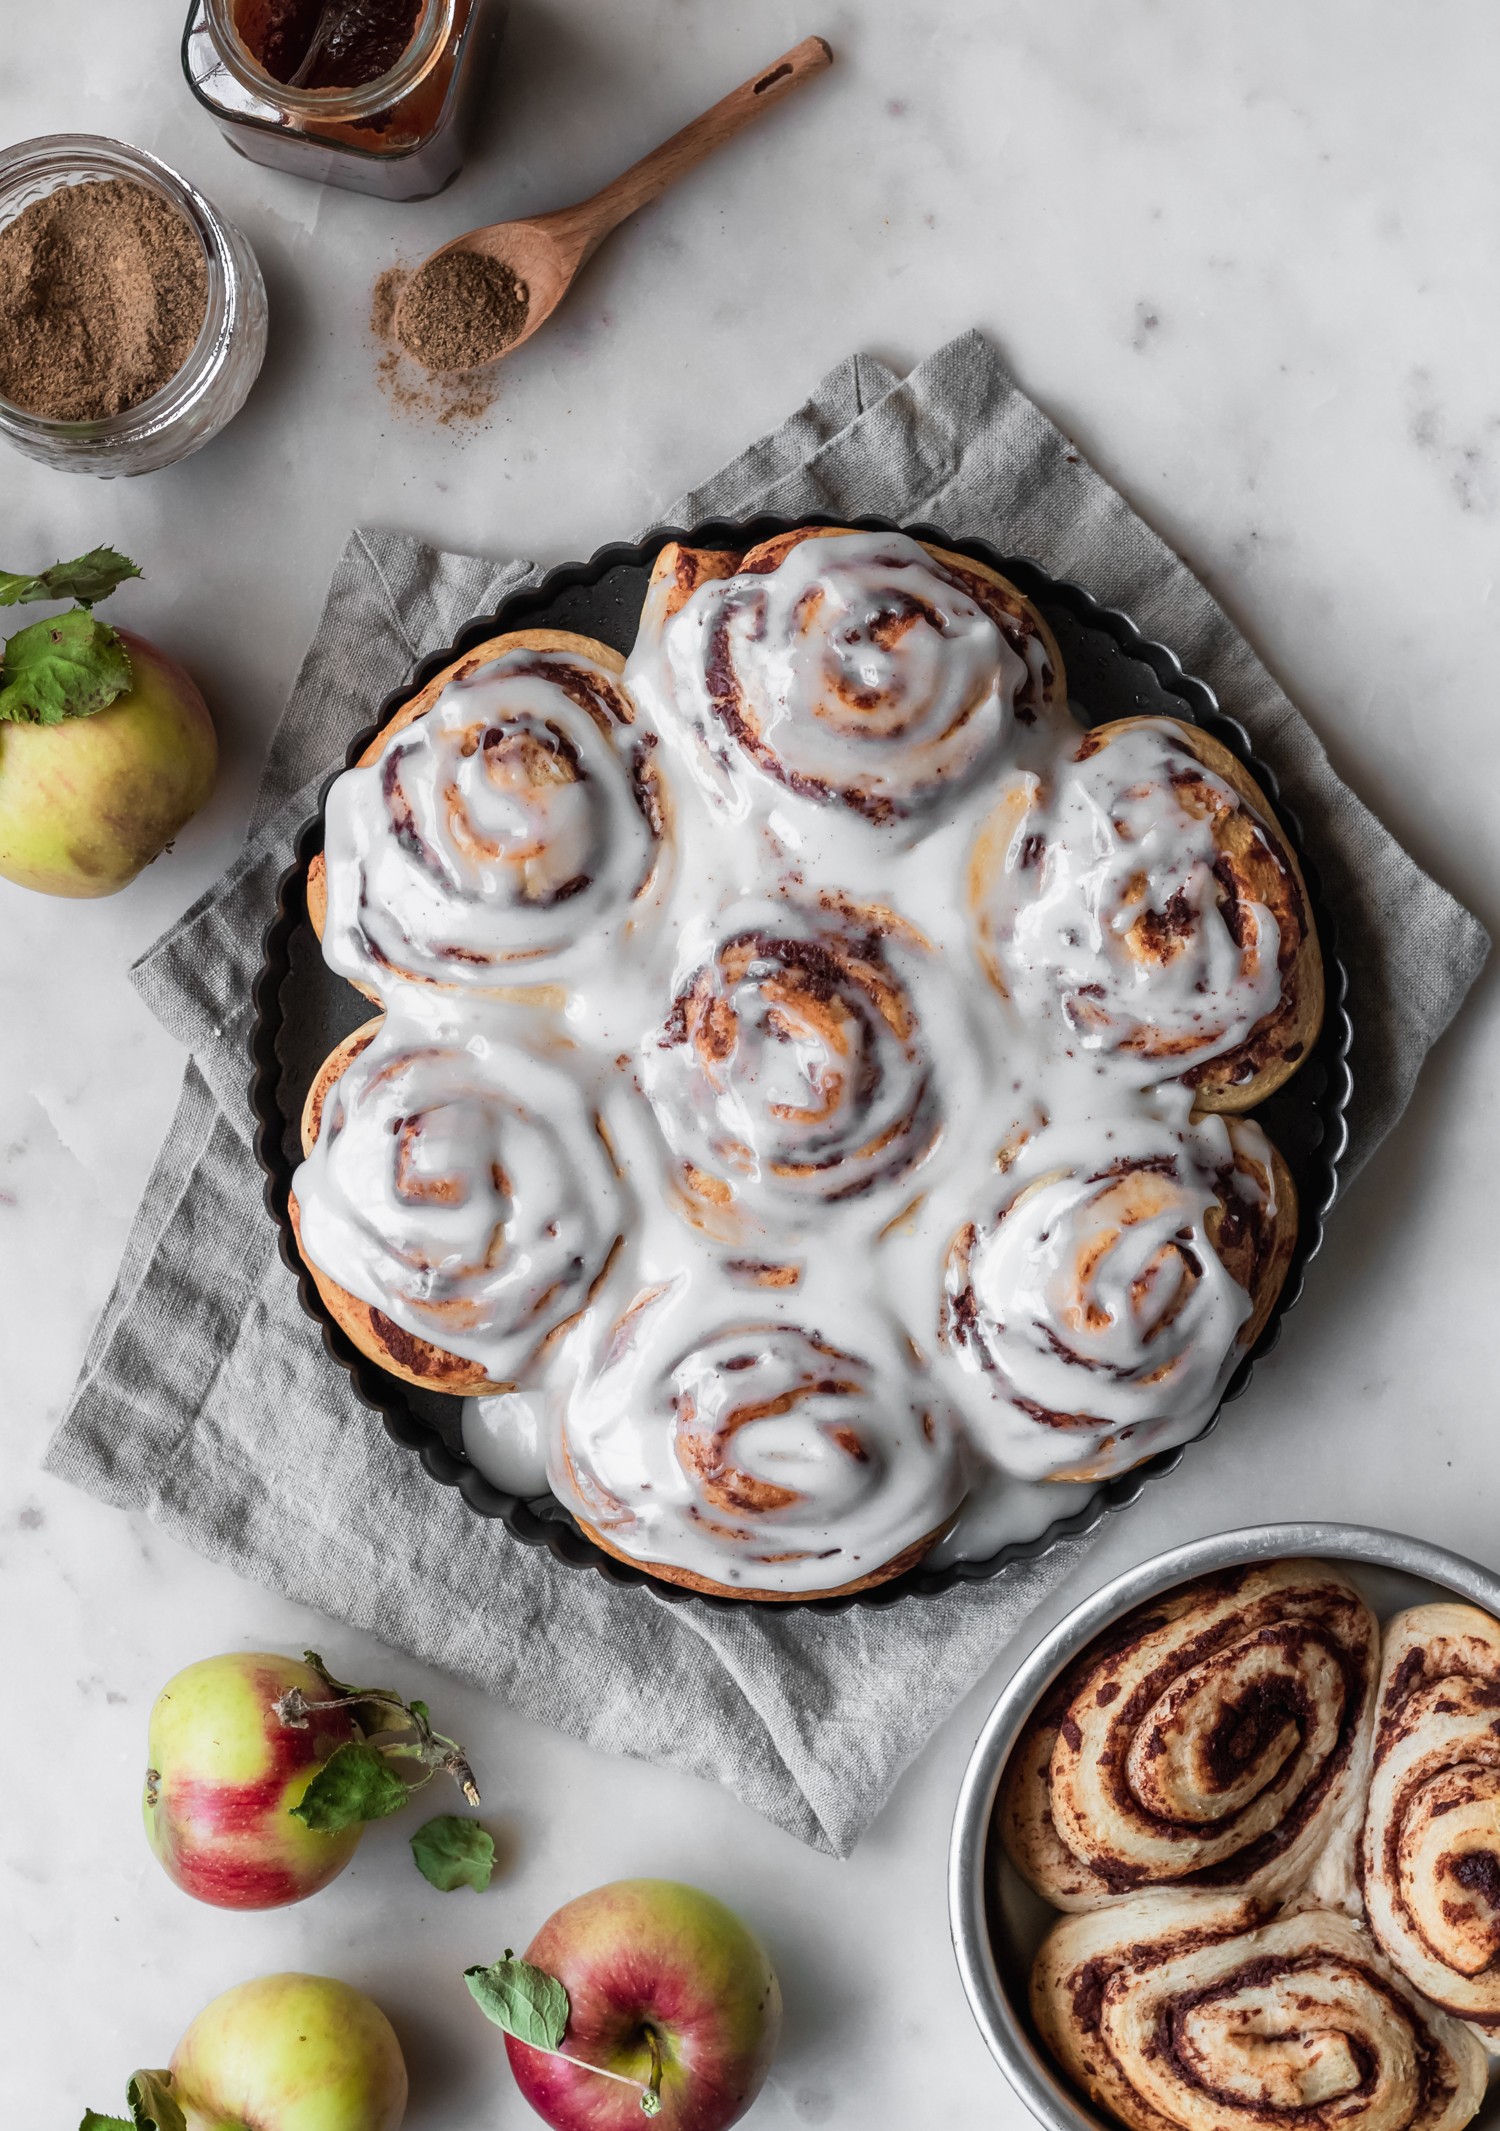 An overhead image of a metal circle pan of apple butter cinnamon rolls with brown butter icing on a marble counter next to a smaller metal tin of un-iced cinnamon rolls, a beige linen, apples, and a jar of apple butter.